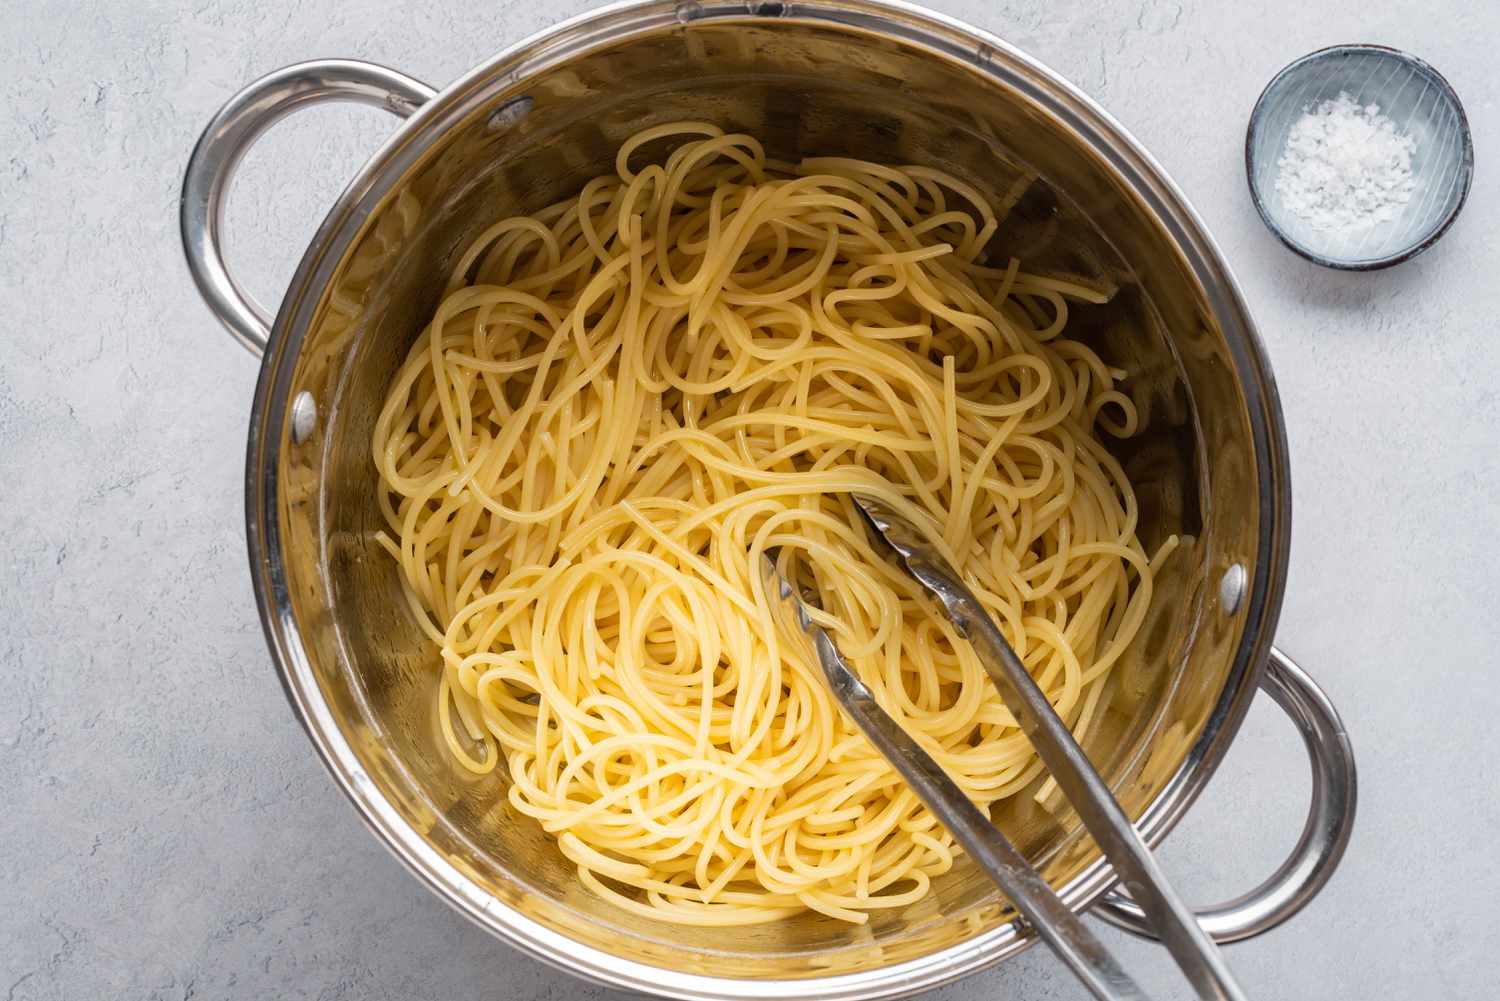 Cooked spaghetti in a pot with metal tongs